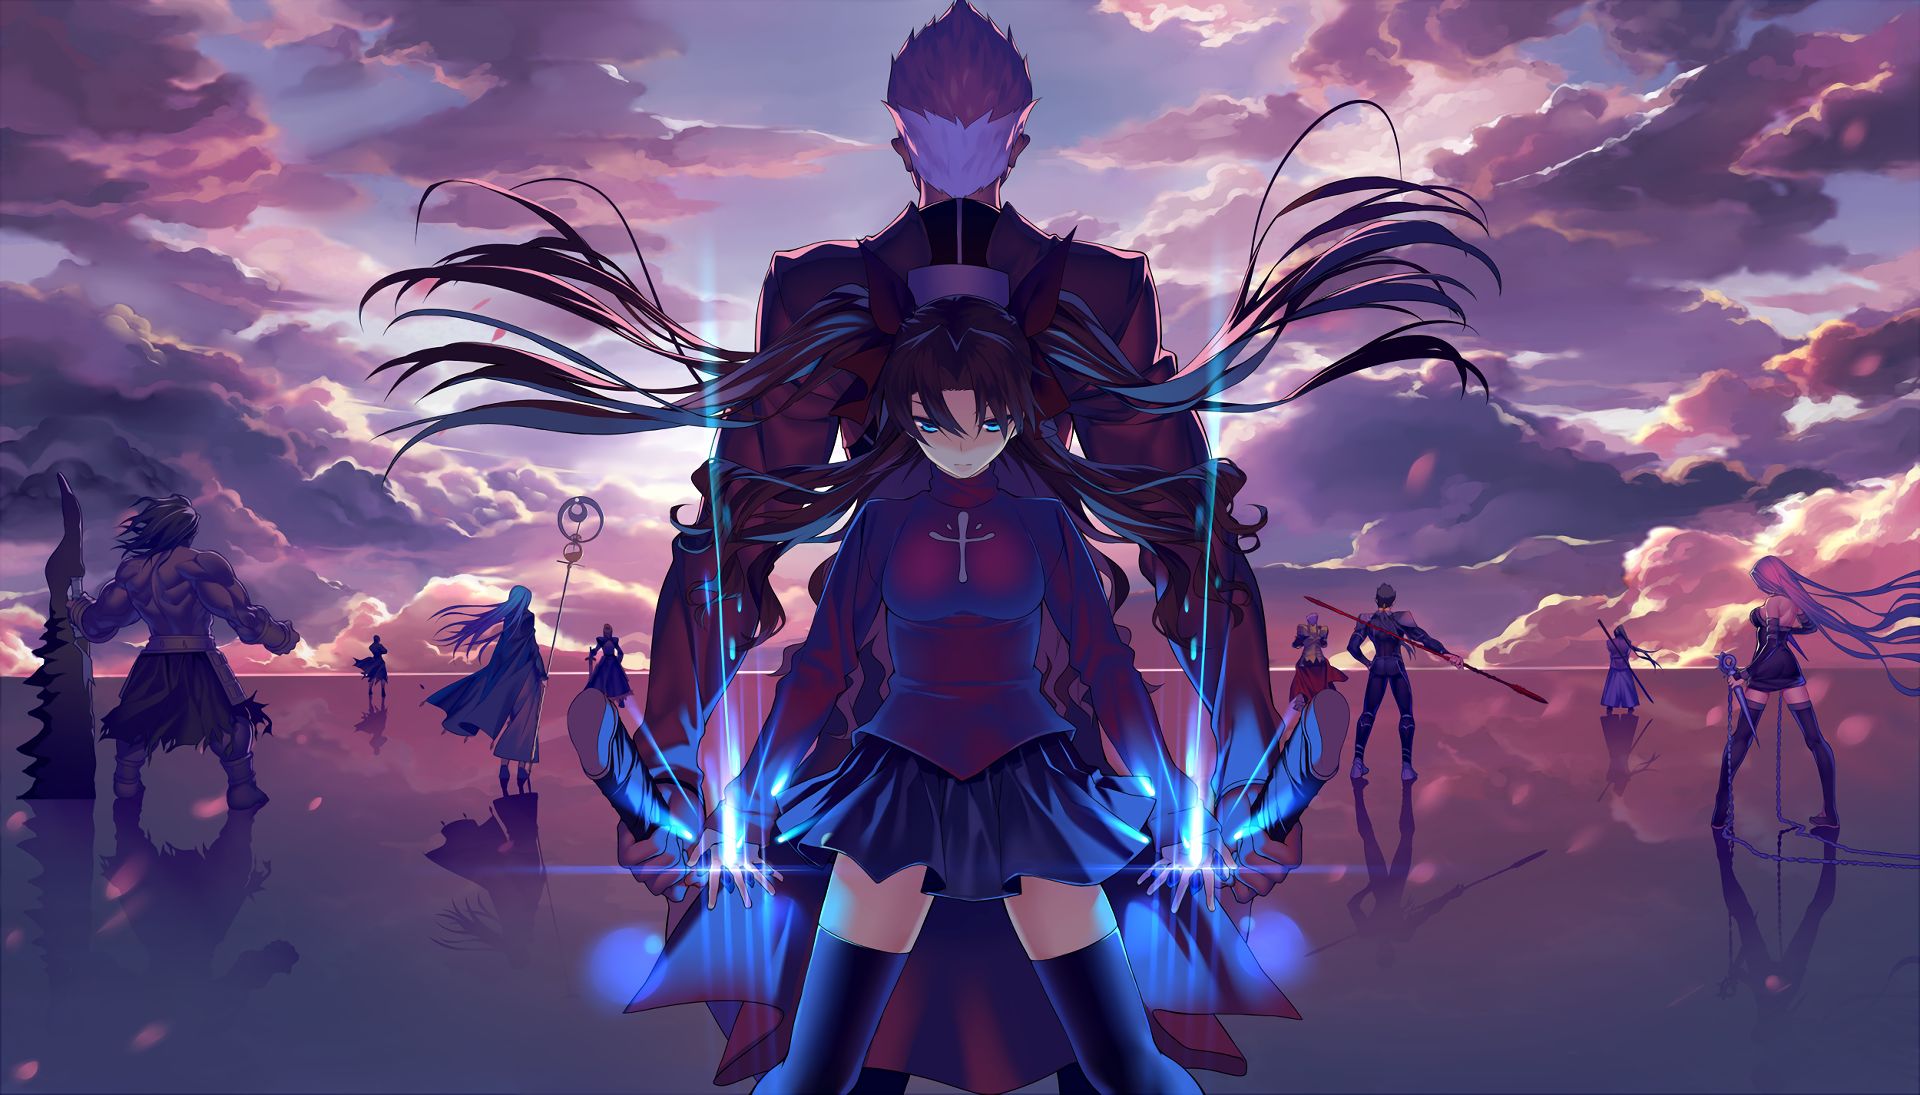 skirt, fate series, reflection, anime, fate/stay night: unlimited blade works, archer (fate/stay night), blue eyes, cloud, rin tohsaka, staff, sword, thigh highs, weapon